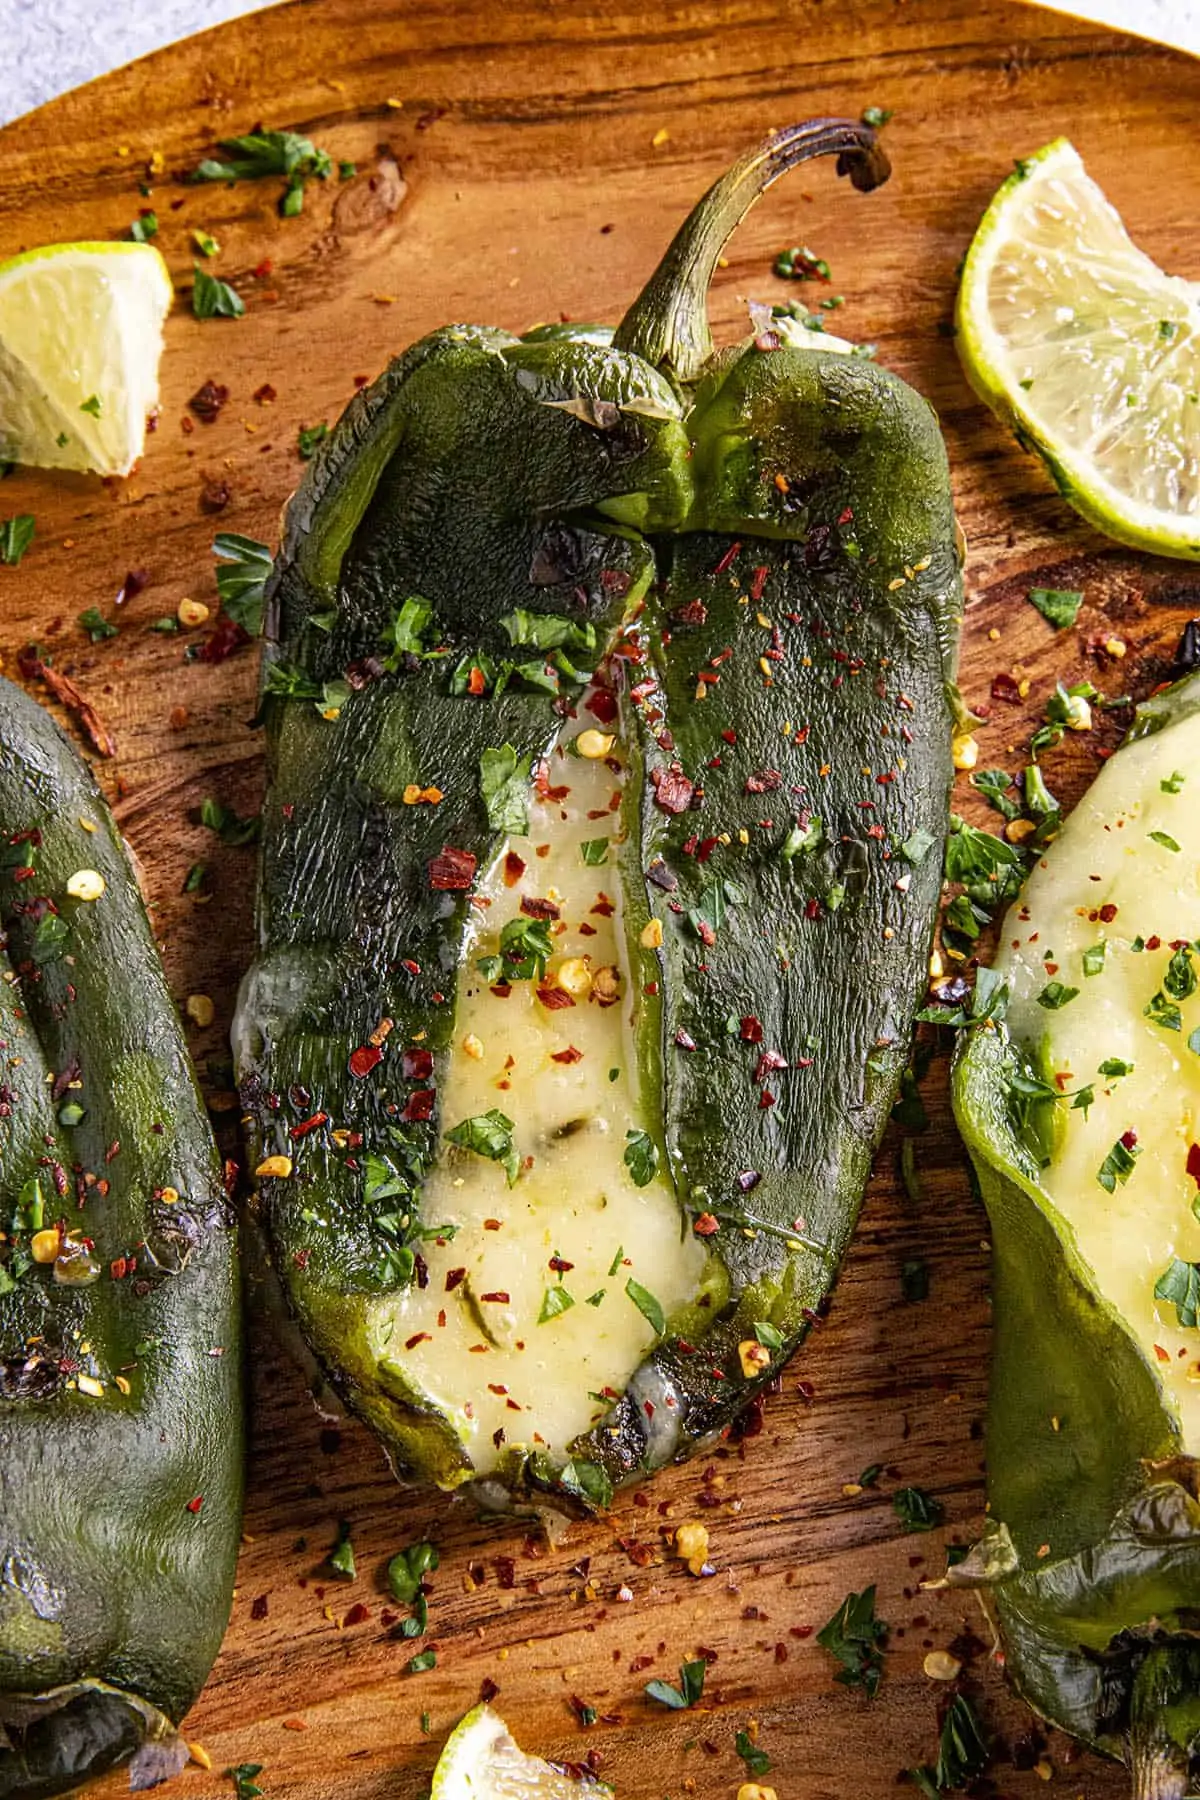 A poblano pepper that has been stuffed with cheese and grilled